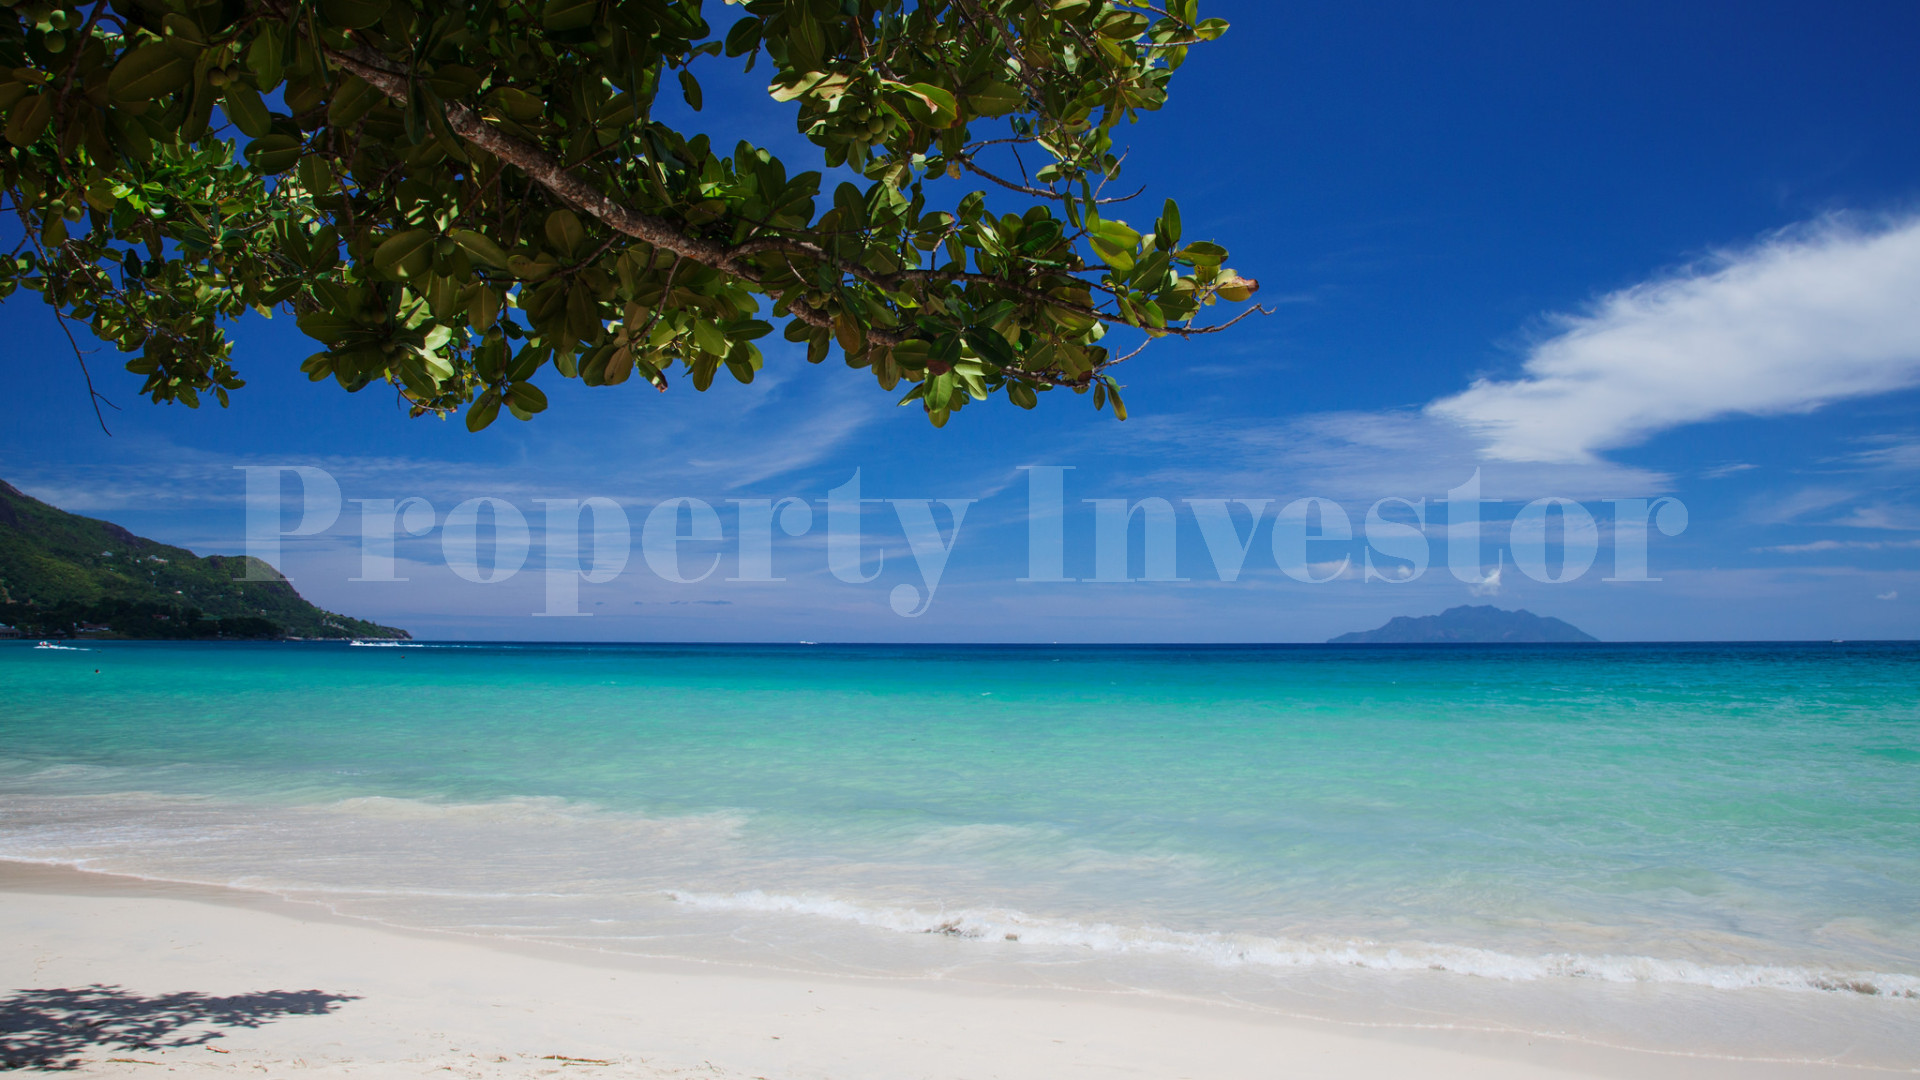 Spectacular 0.16 Hectare Panoramic Sea View Lot Near Beau Vallon Beach in Seychelles